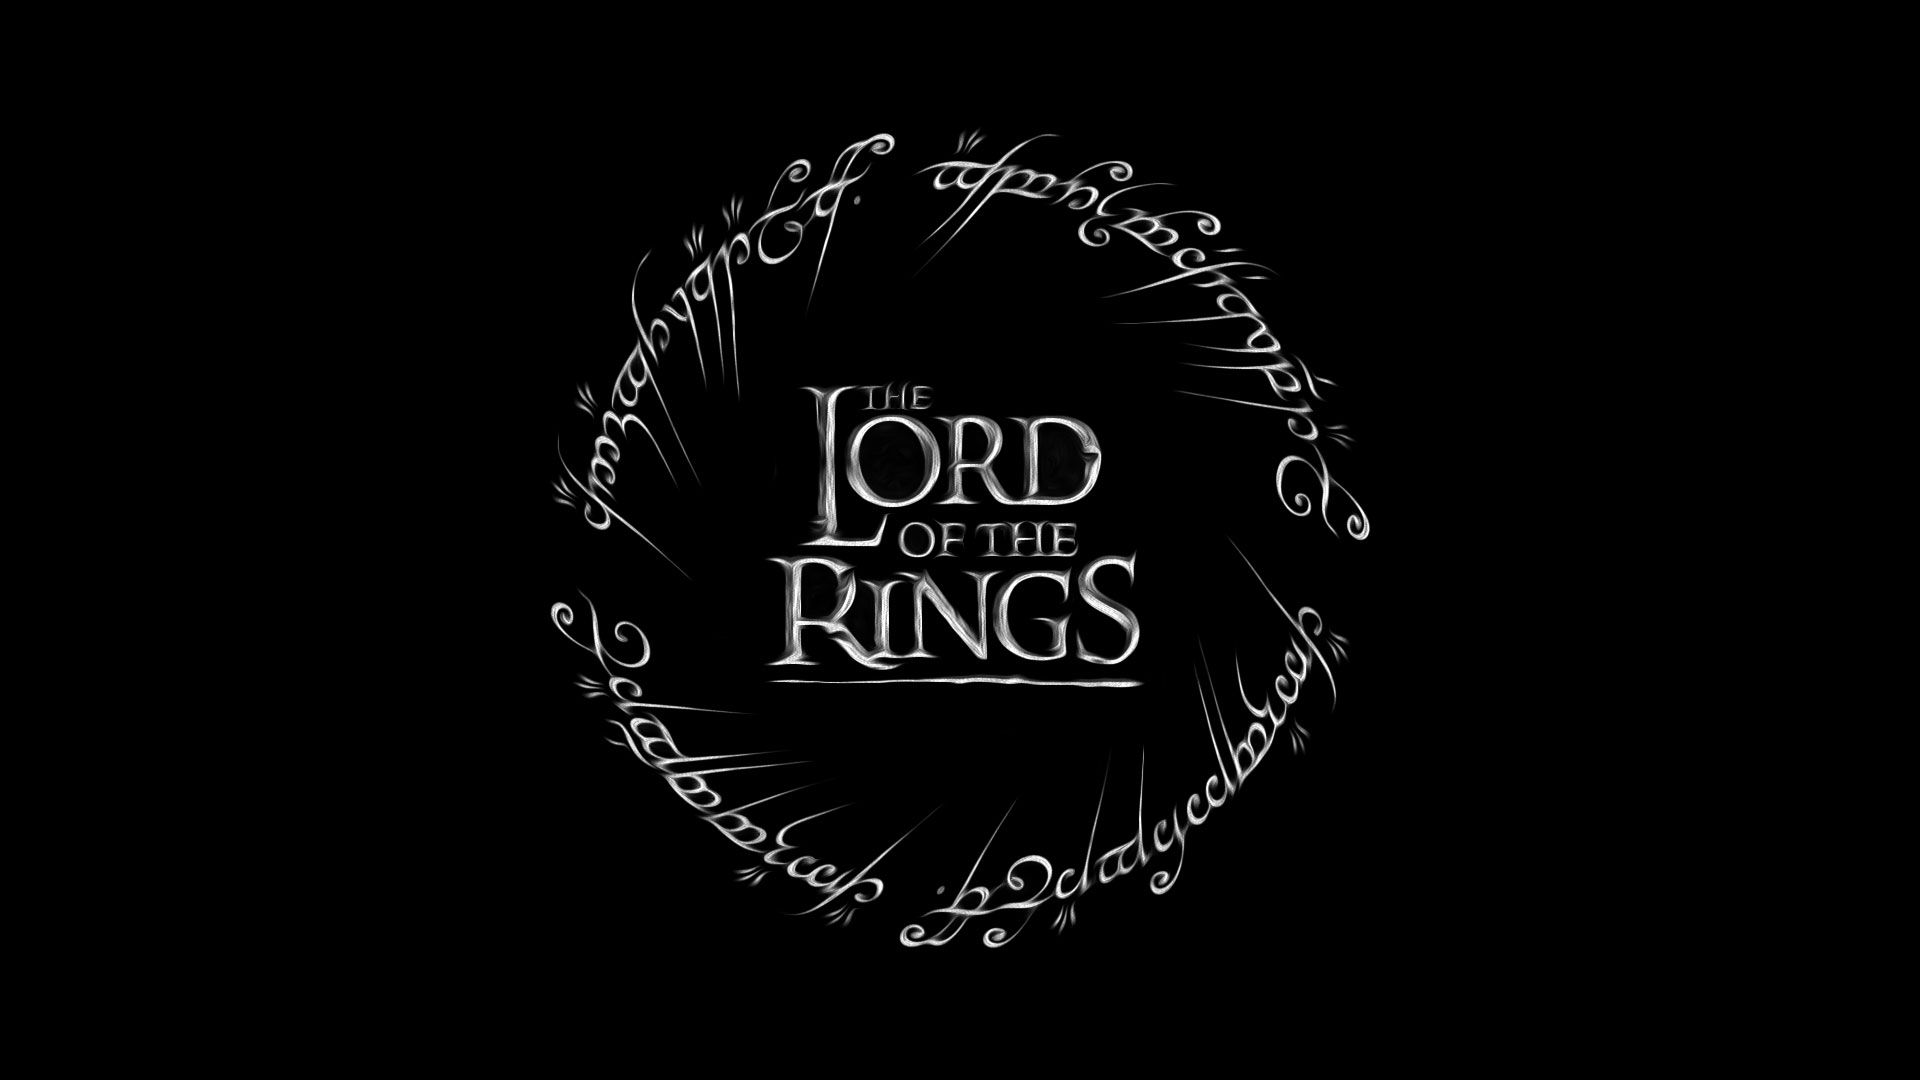 The Lord of the Rings HD Wallpaper 1920x1080 ID22126